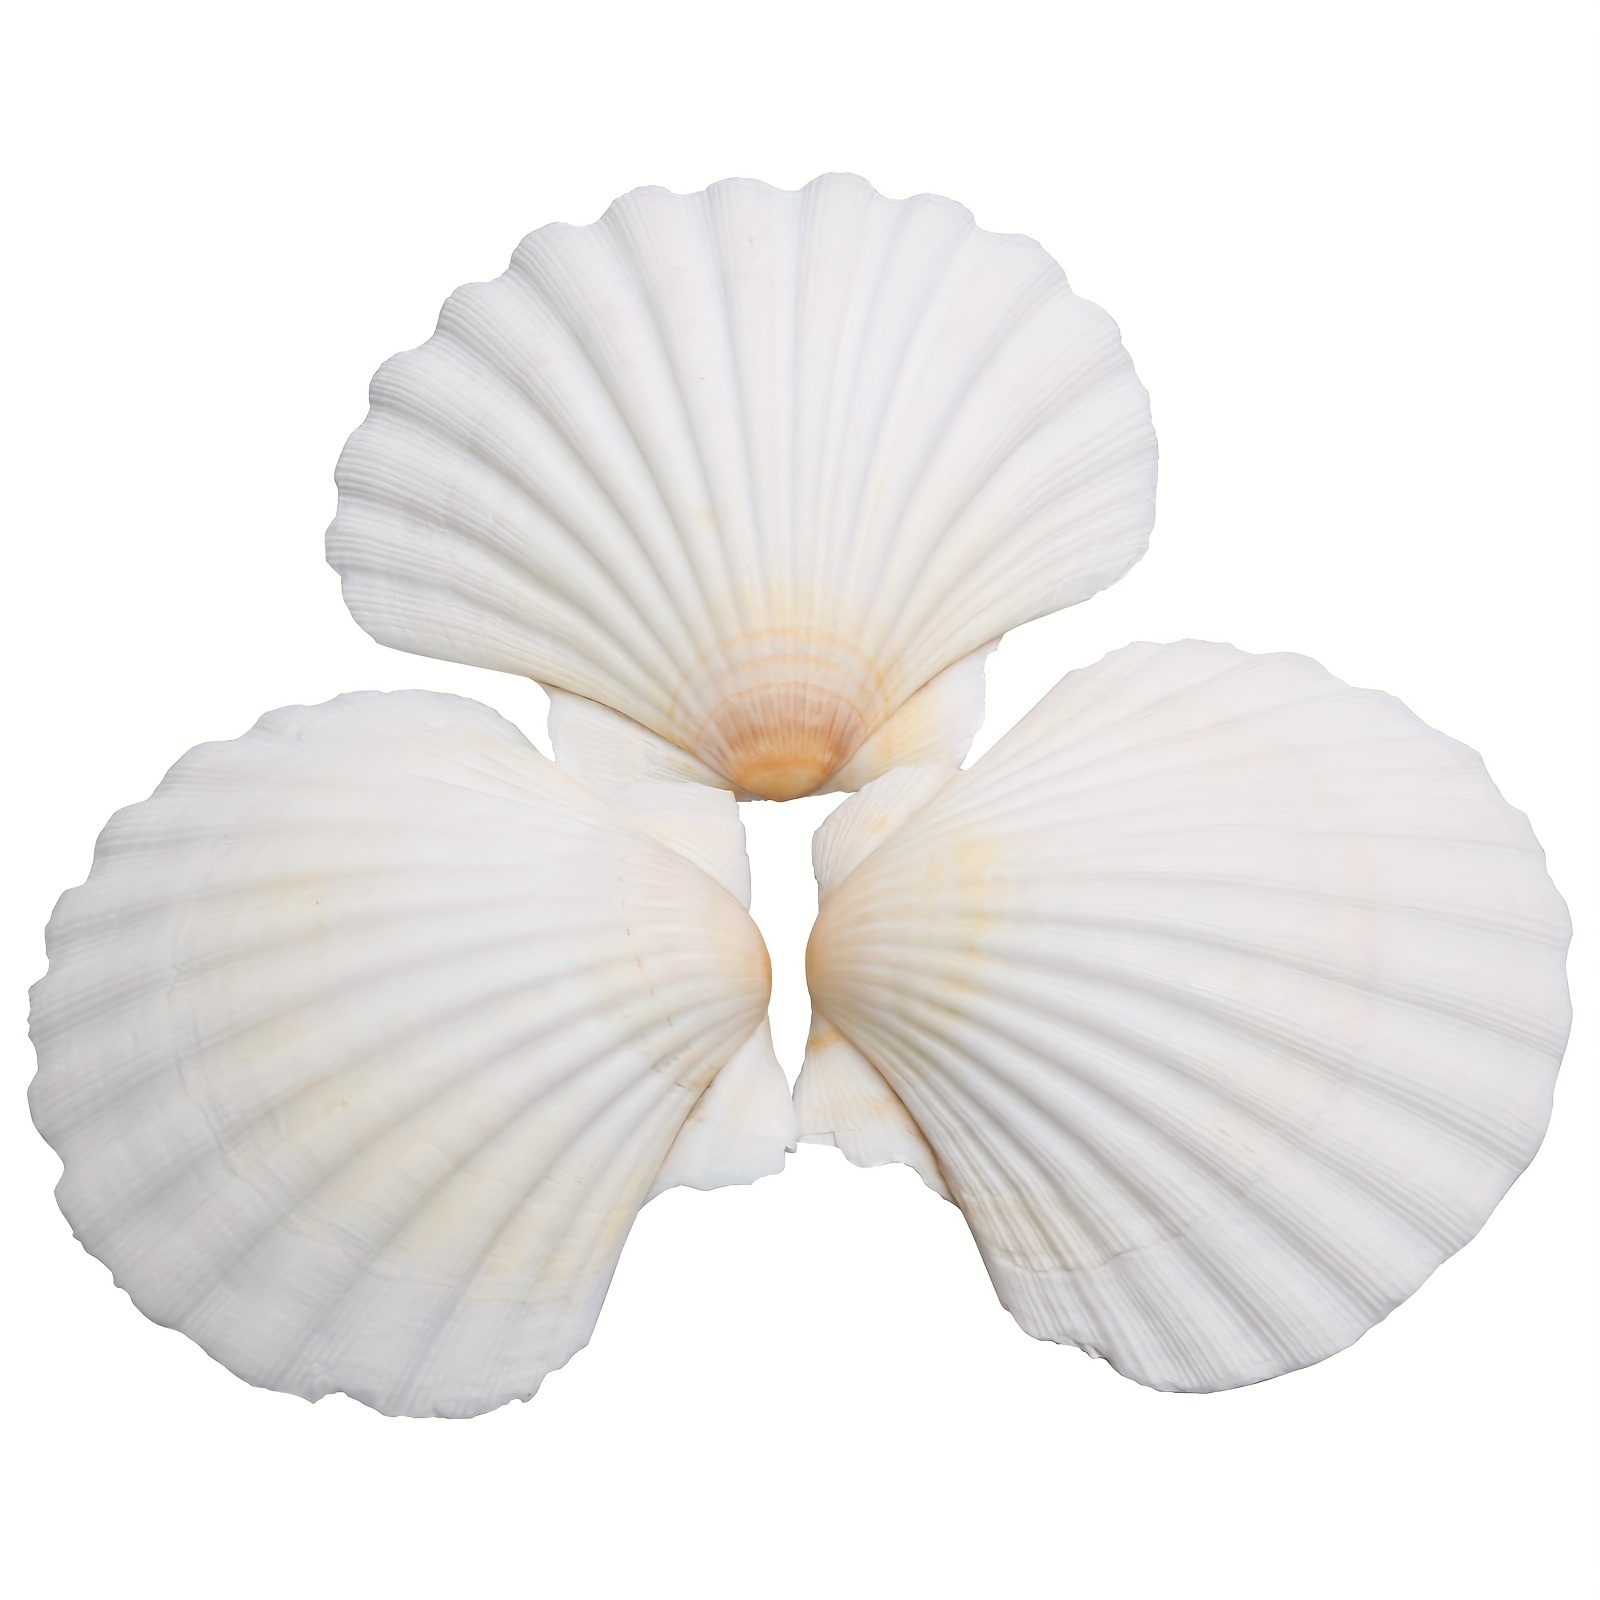  gopiter Sea Shells - 1.5'' to 2.5'' Mixed Beach Seashells -  Natural sea Shells for Crafting Fish Tank Vase Fillers Beach Theme Party  Wedding Decorations Home Decorations DIY Crafts (White Series) 